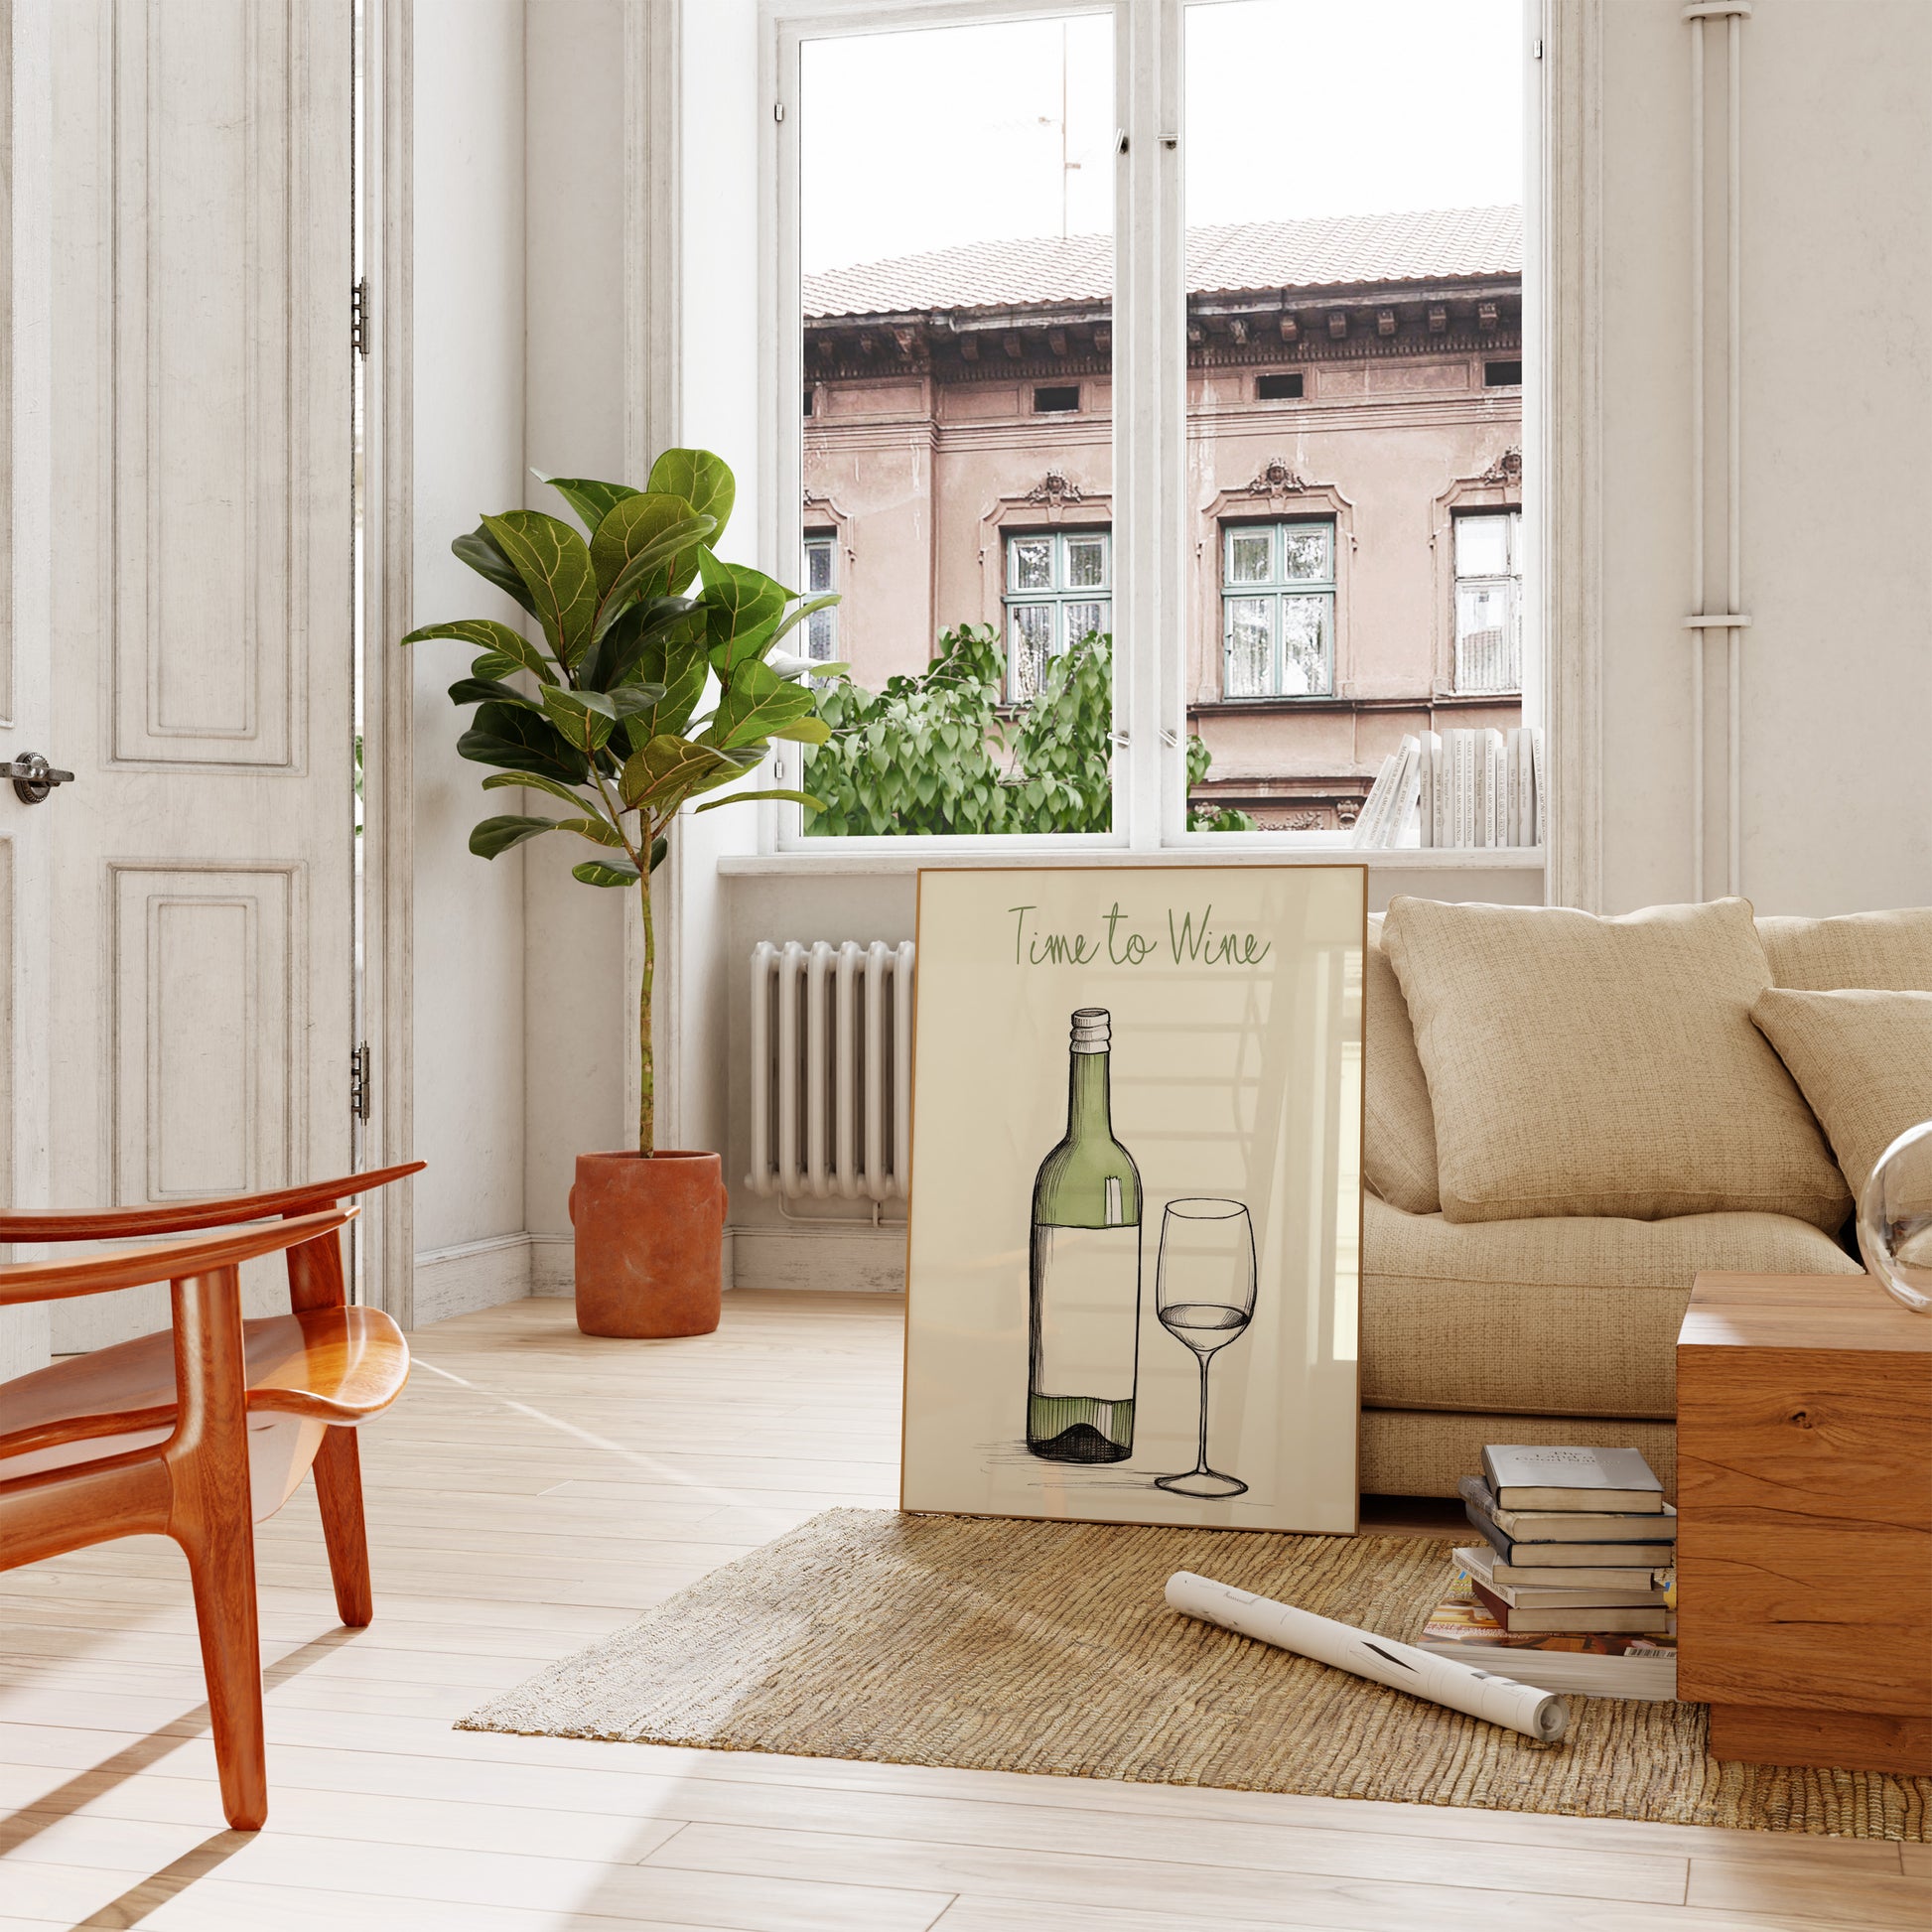 A cozy living room with a plant, furniture, and an artwork of a bottle and glass.